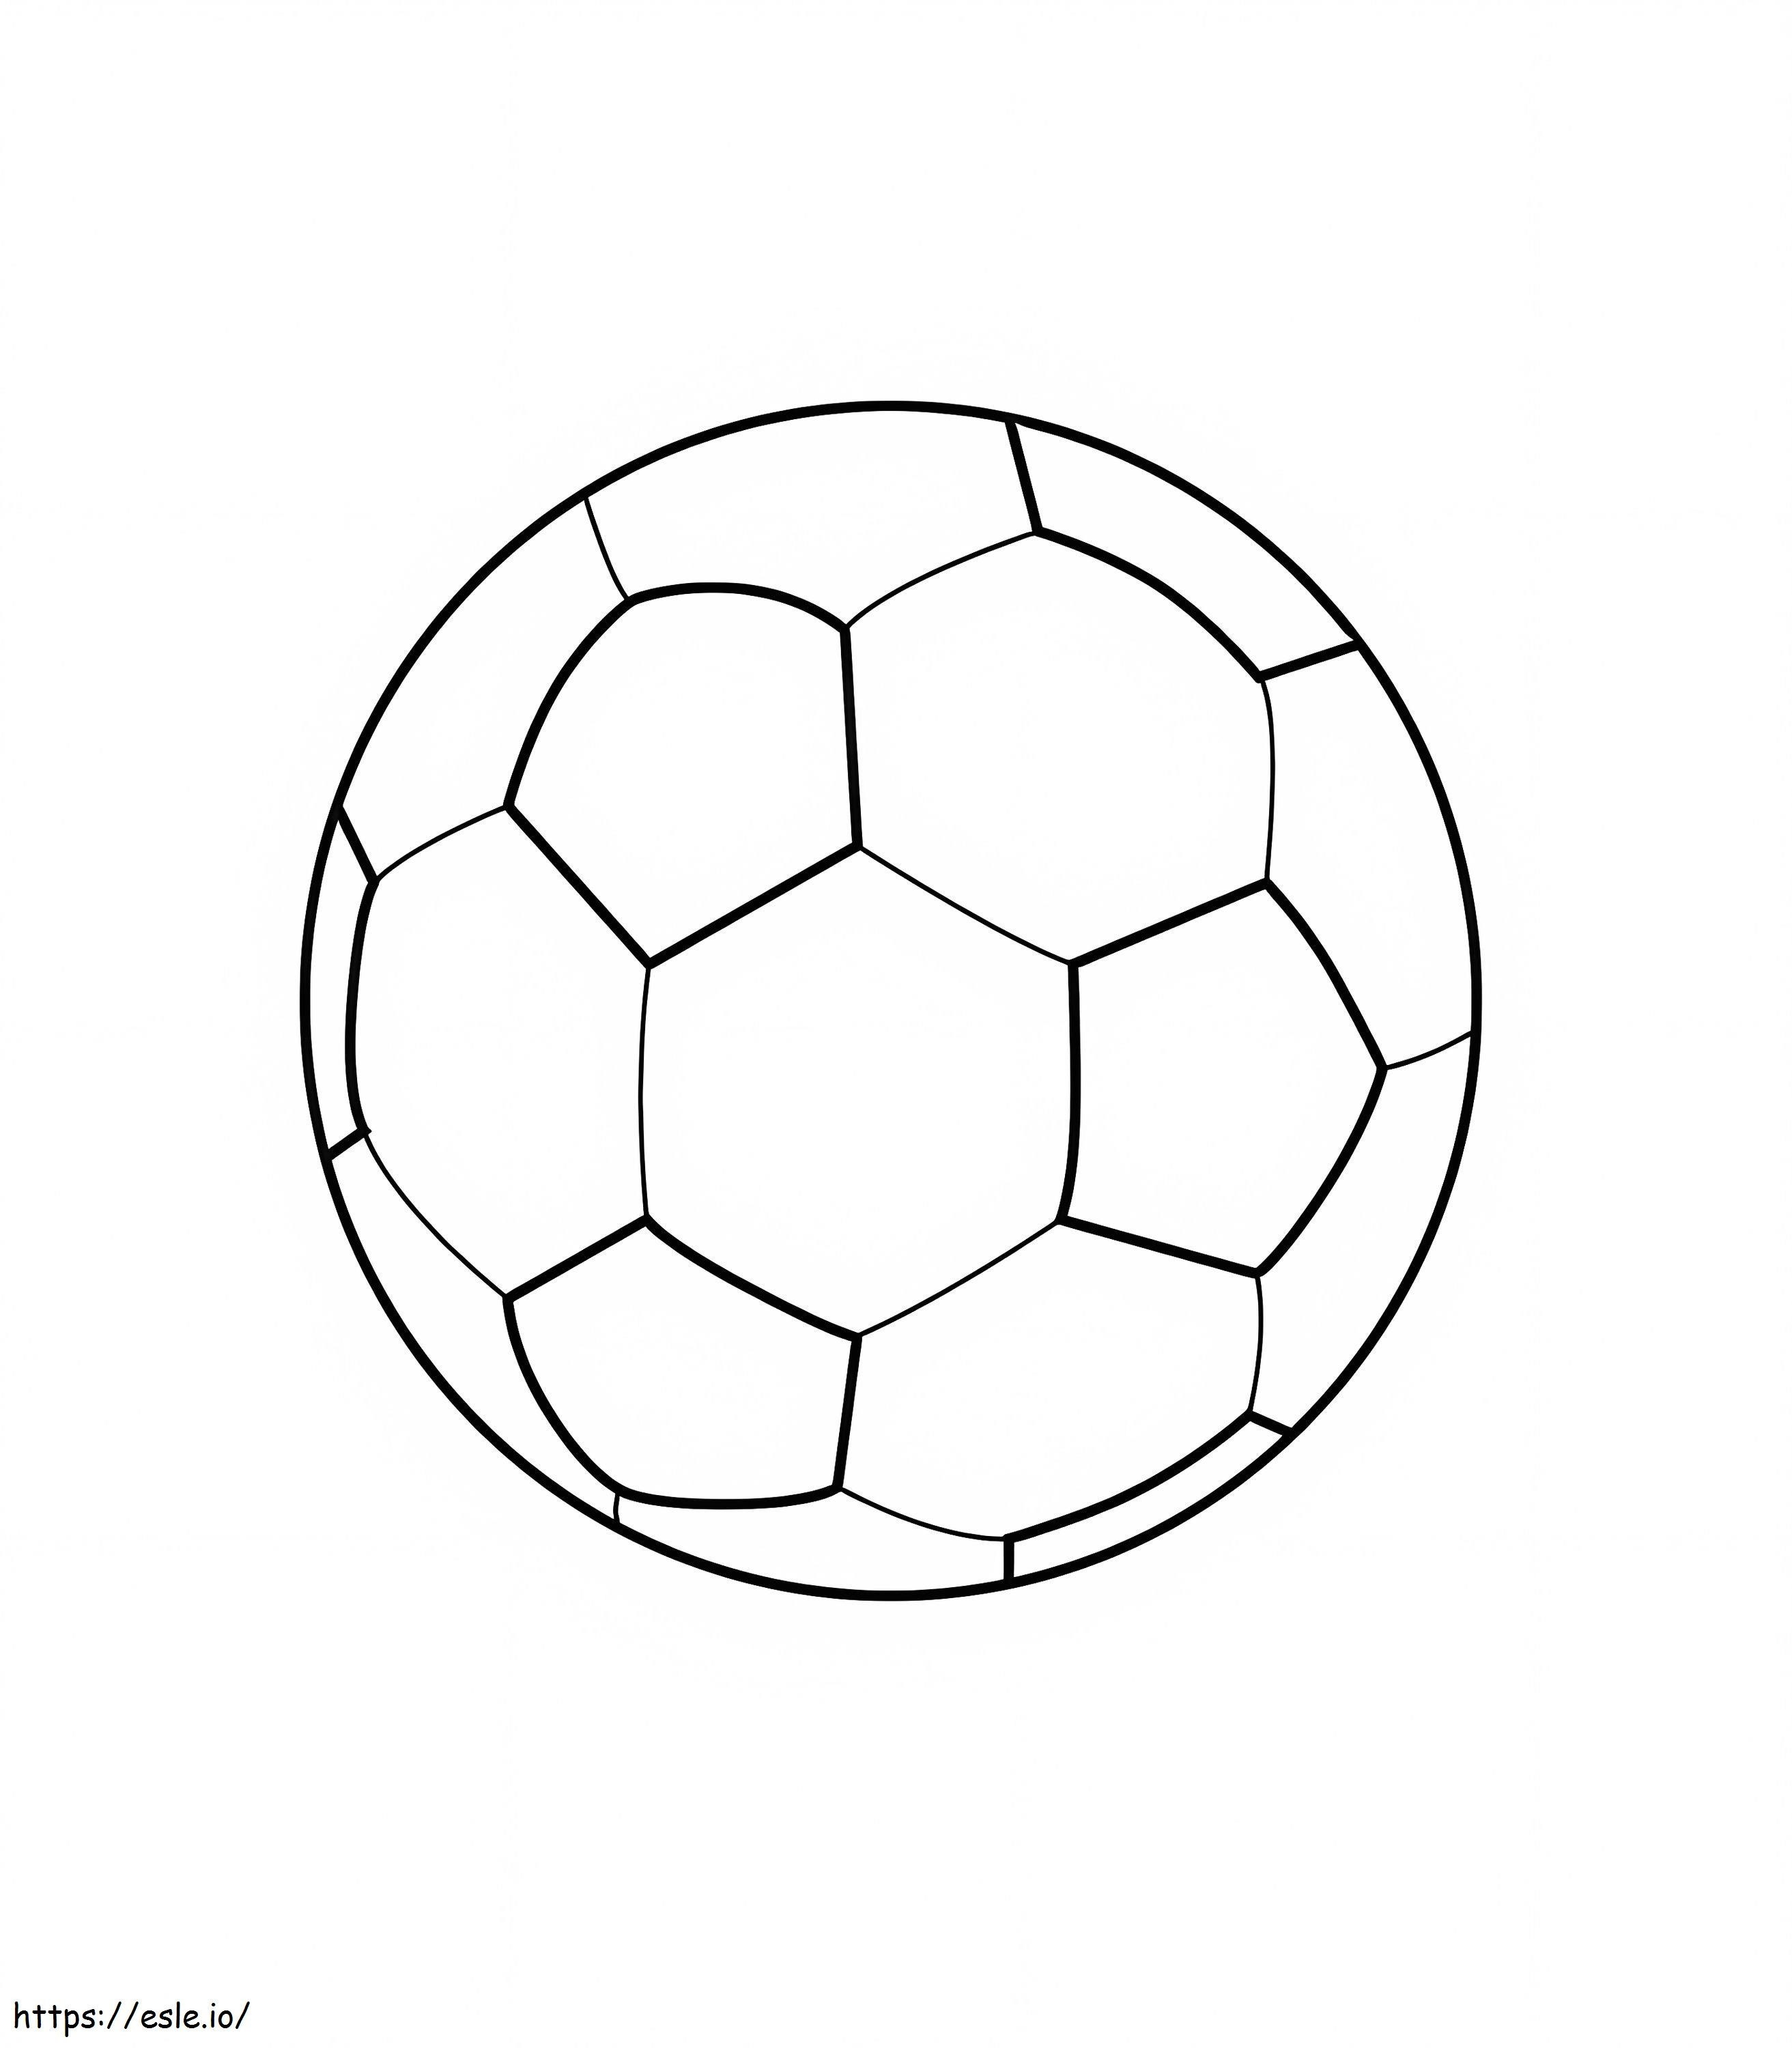 Free Printable Soccer Ball coloring page